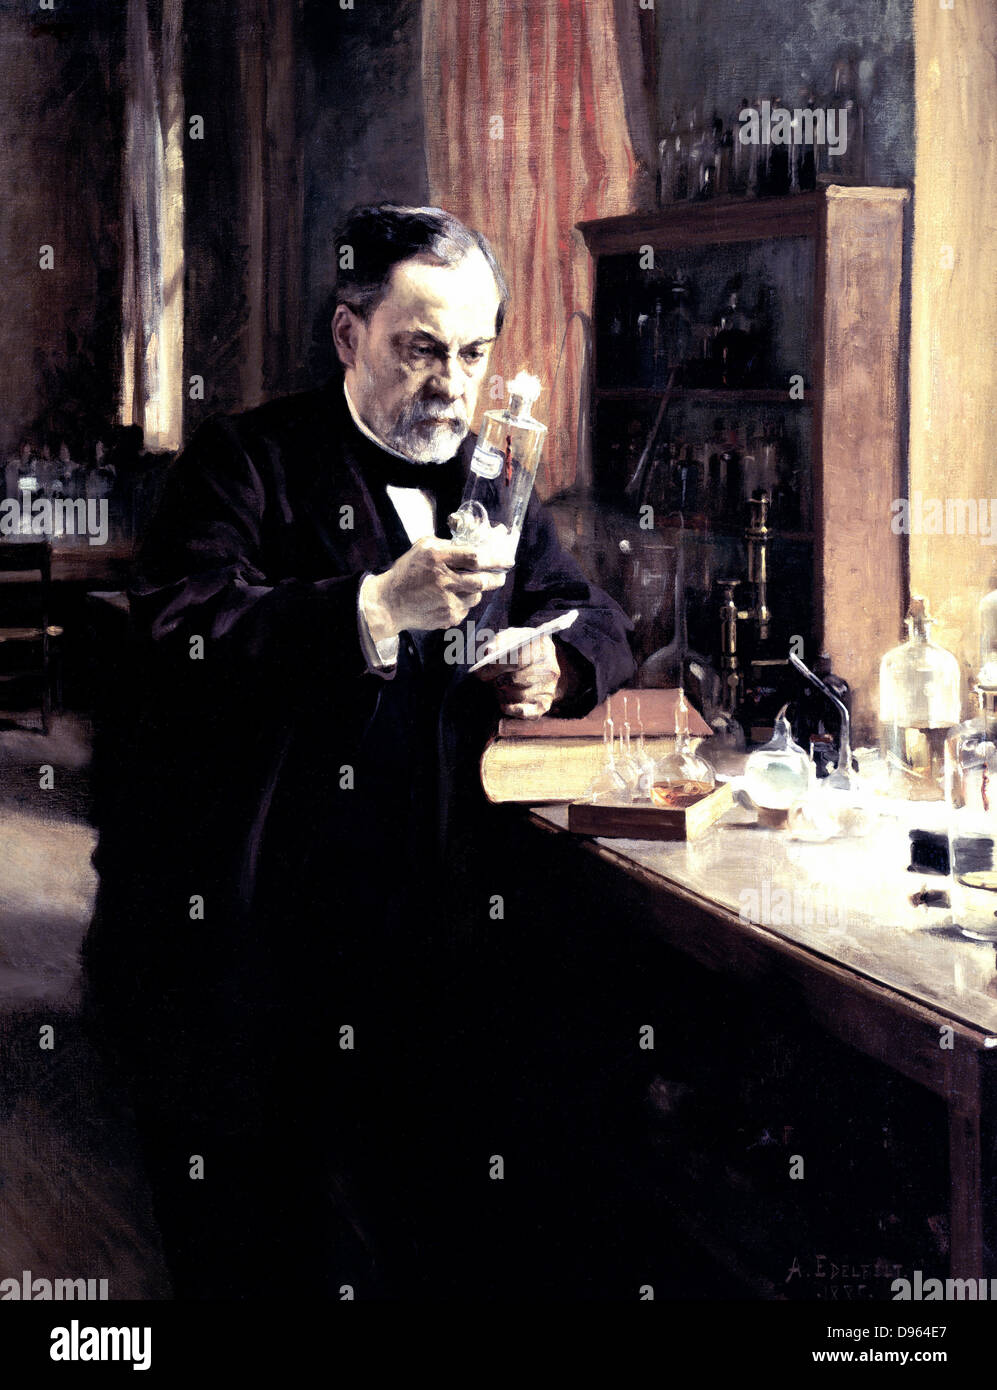 Louis Pasteur' (1822-1895) French chemist and biologist at work in his laboratory c1889. Pioneer of inoculation against hydrophobia. Albert Edelfelt (1854-1905) French. Painting. Oil on canvas.  Musee d'Orsay, Paris. Stock Photo